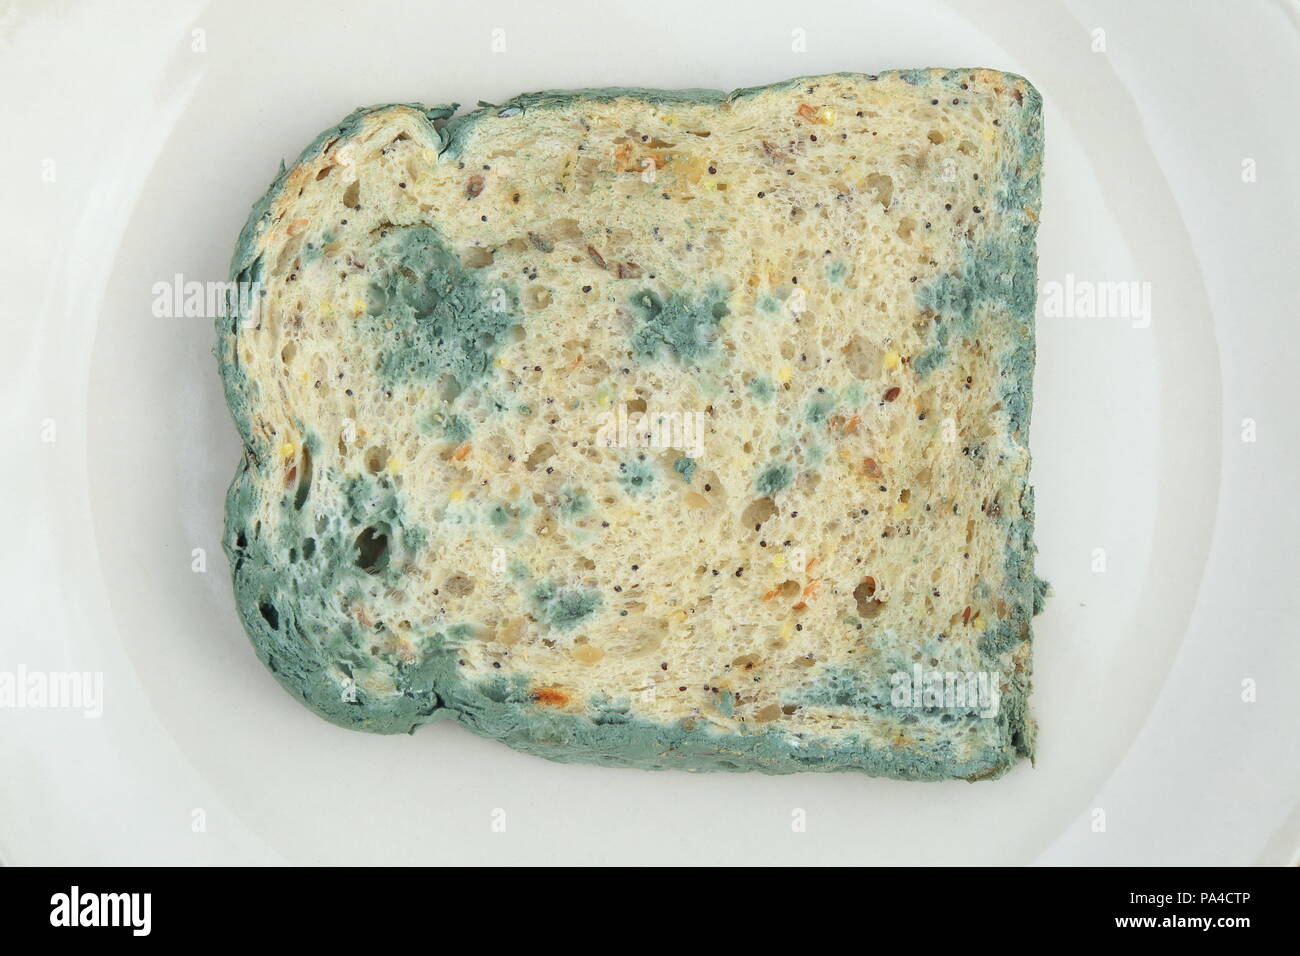 Old mouldy bread on a white plate Stock Photo